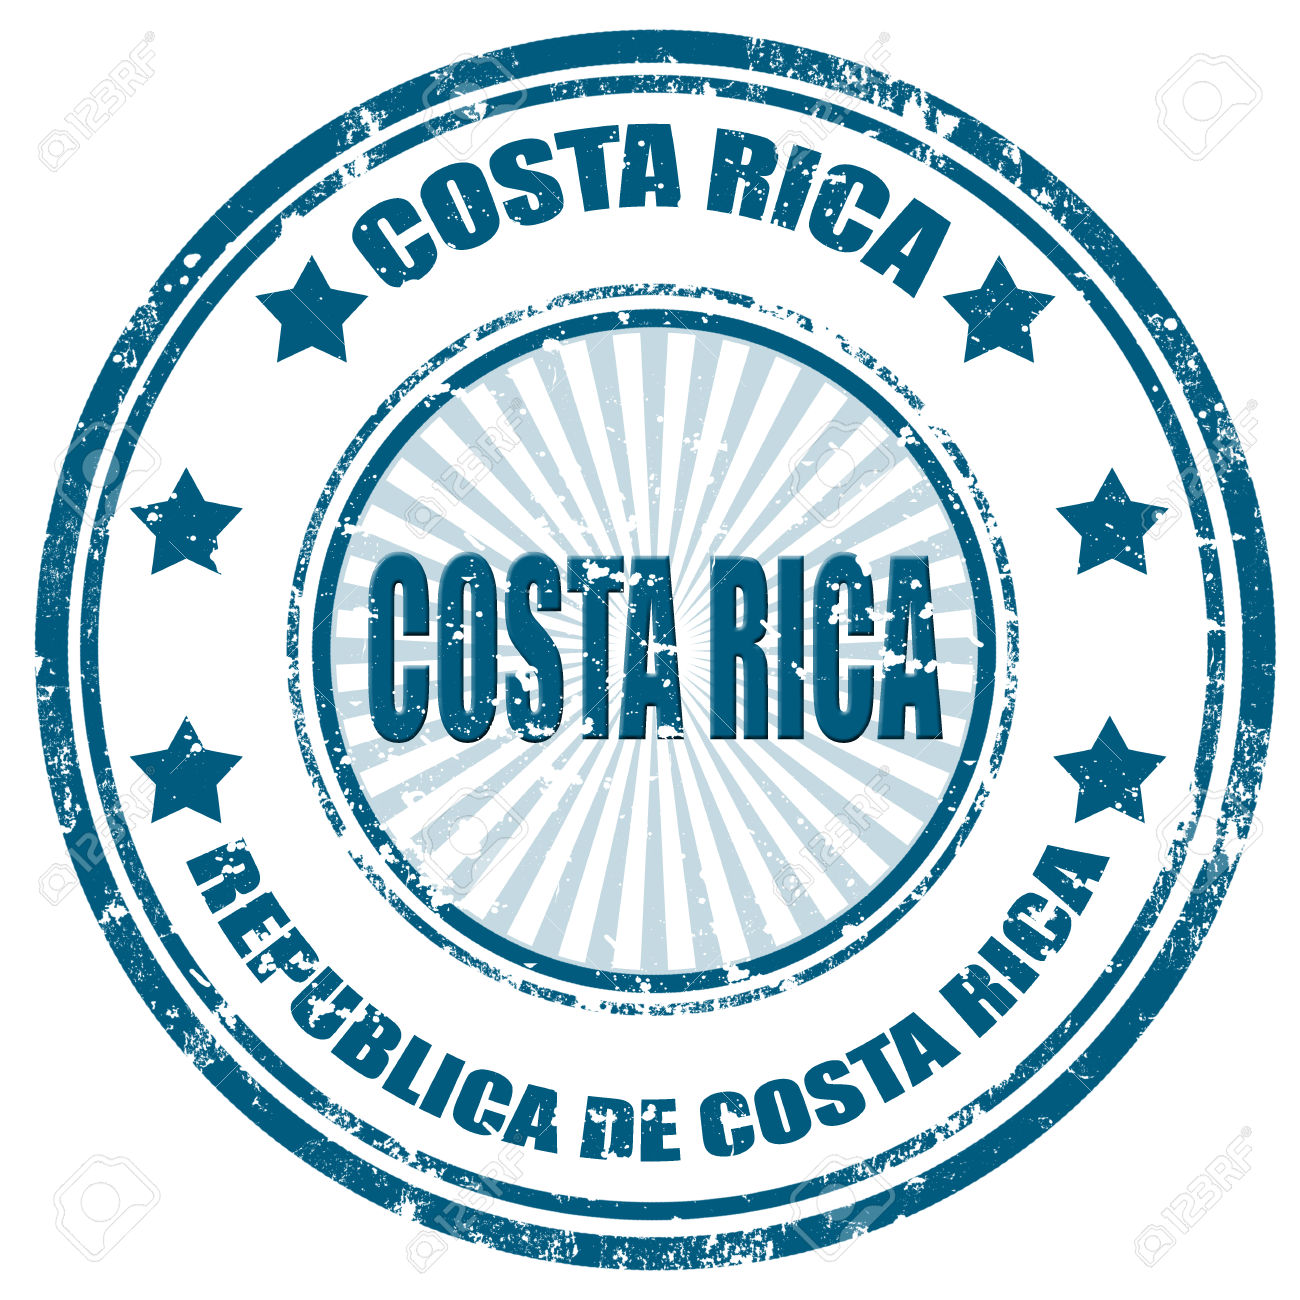 Costa Rica clipart #5, Download drawings